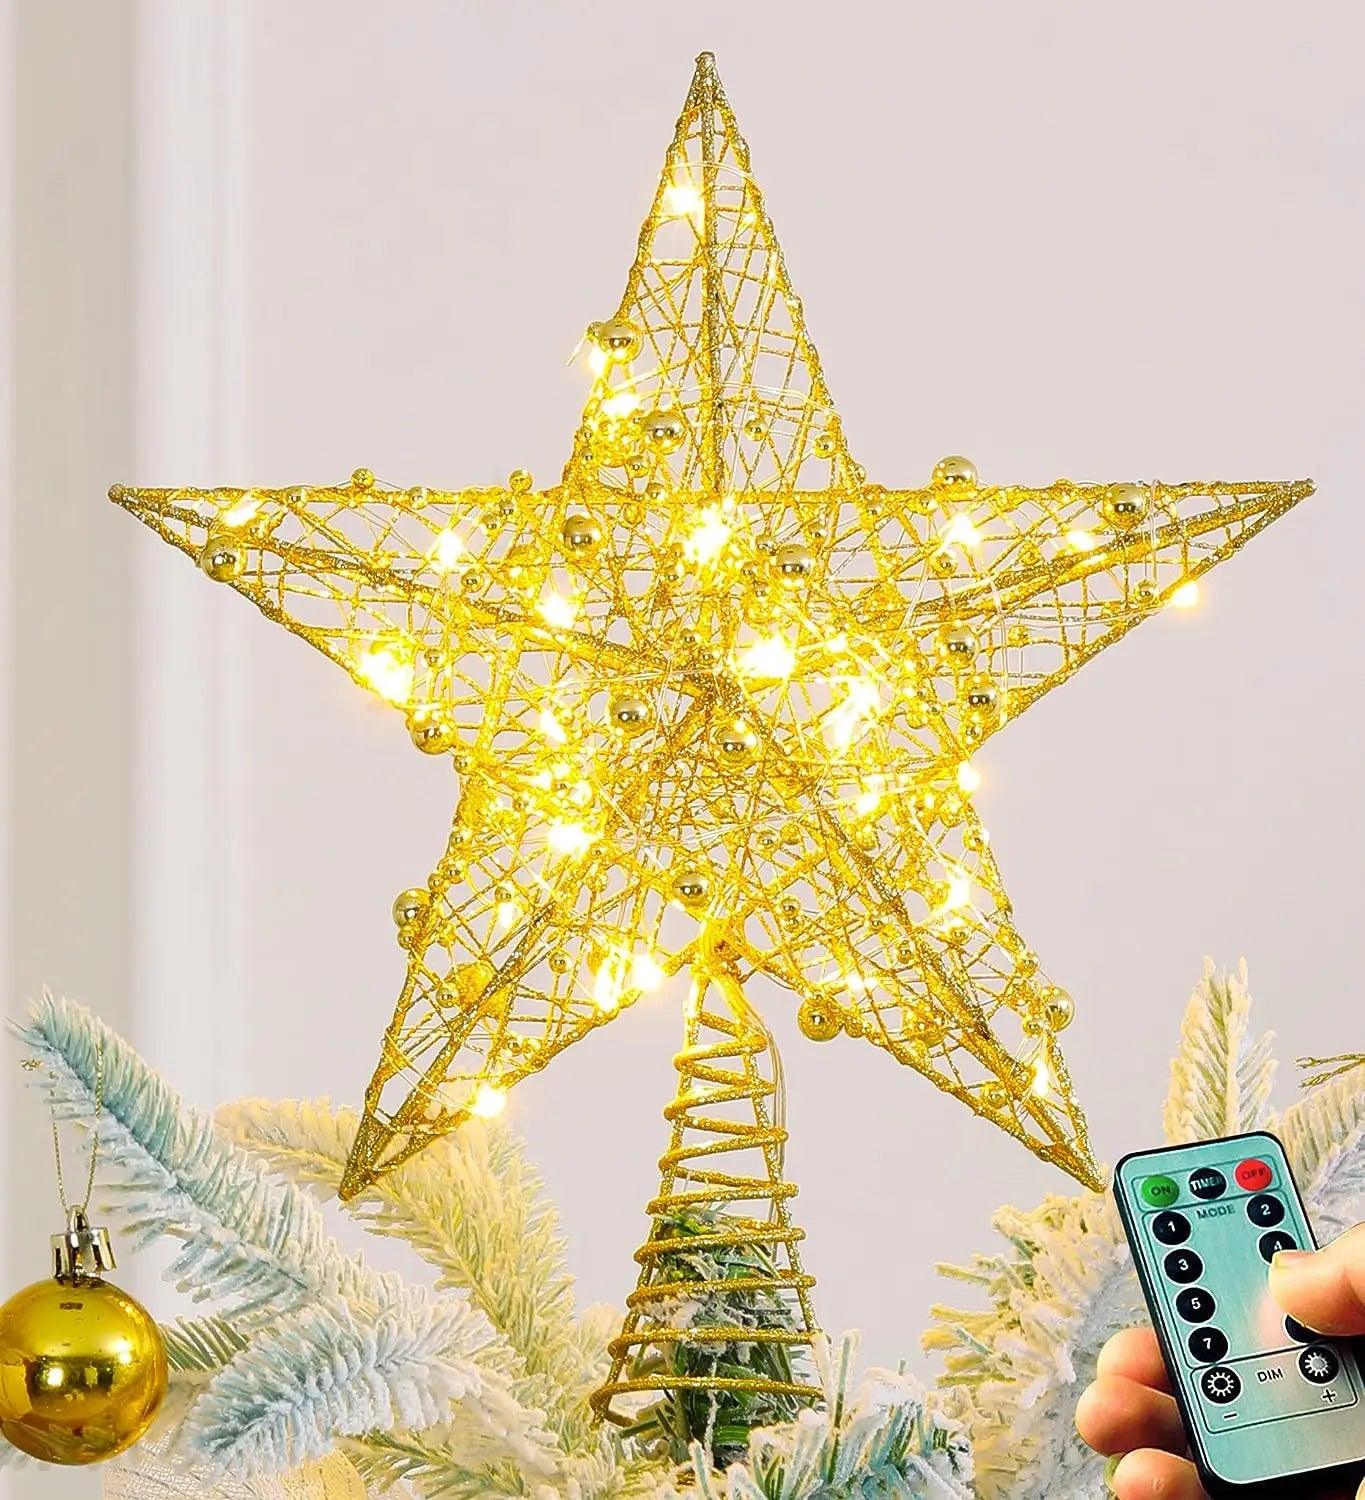 LED Lighted Iron Glitter Star Christmas Tree Topper - Sparkling Holiday Decoration  ourlum.com   